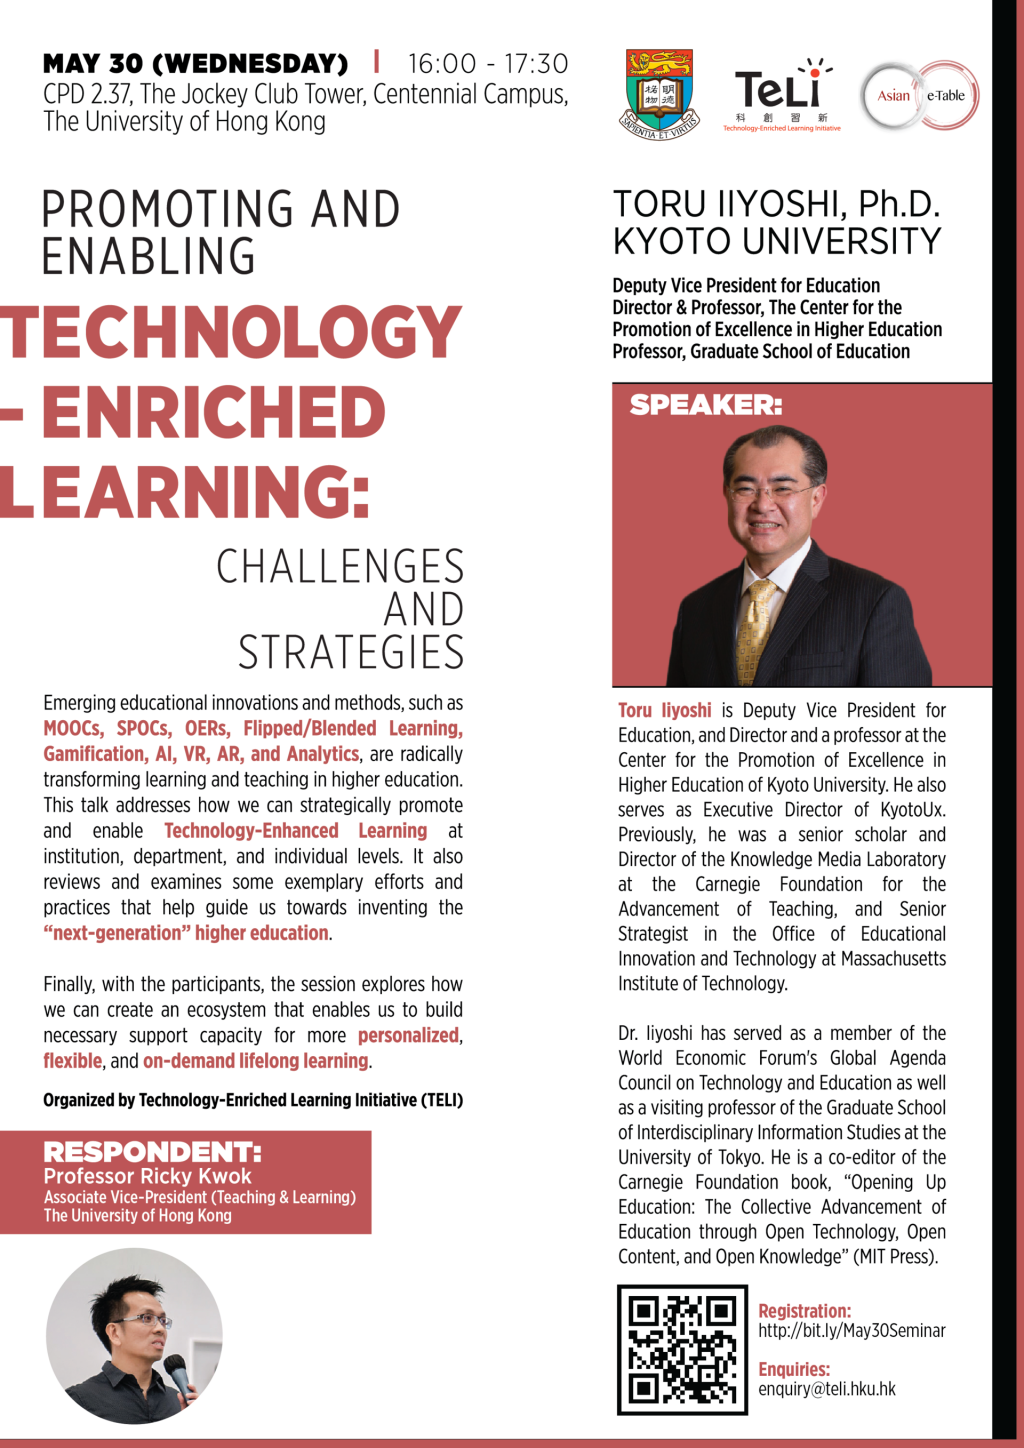 Promoting and Enabling Technology-Enriched Learning: Challenges and Strategies